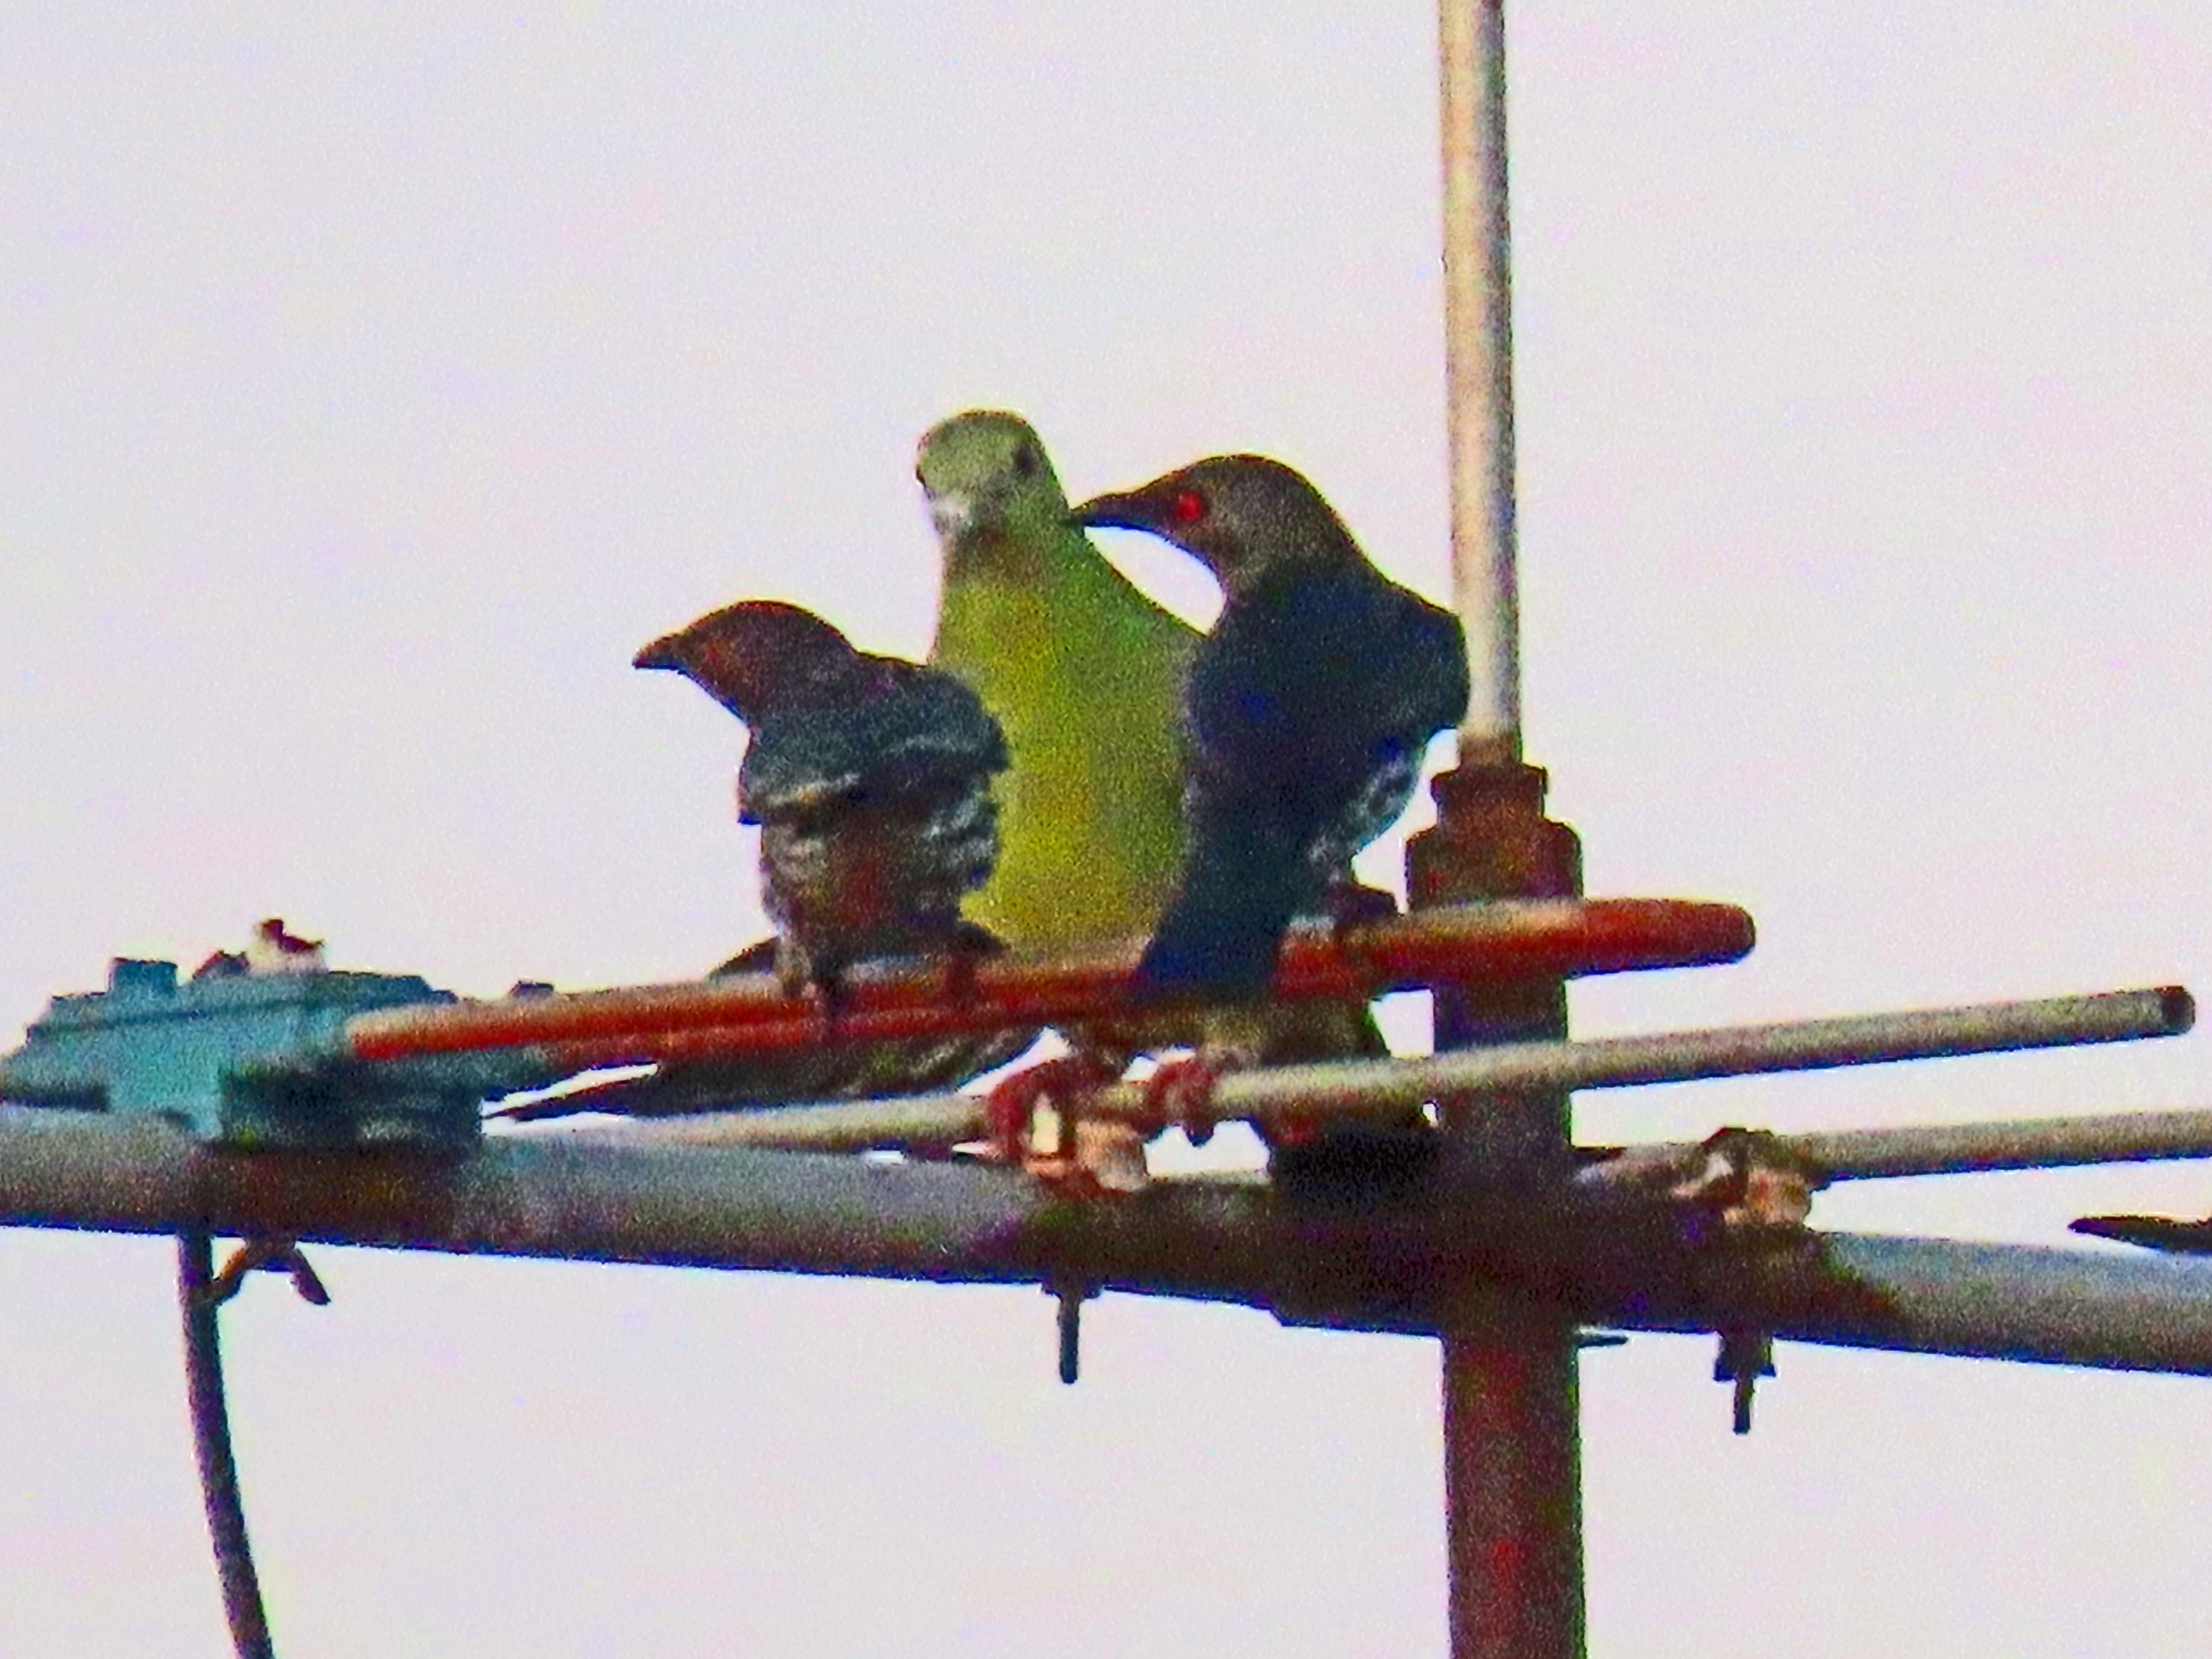 Asian glossy starling and pink-necked green pigeon